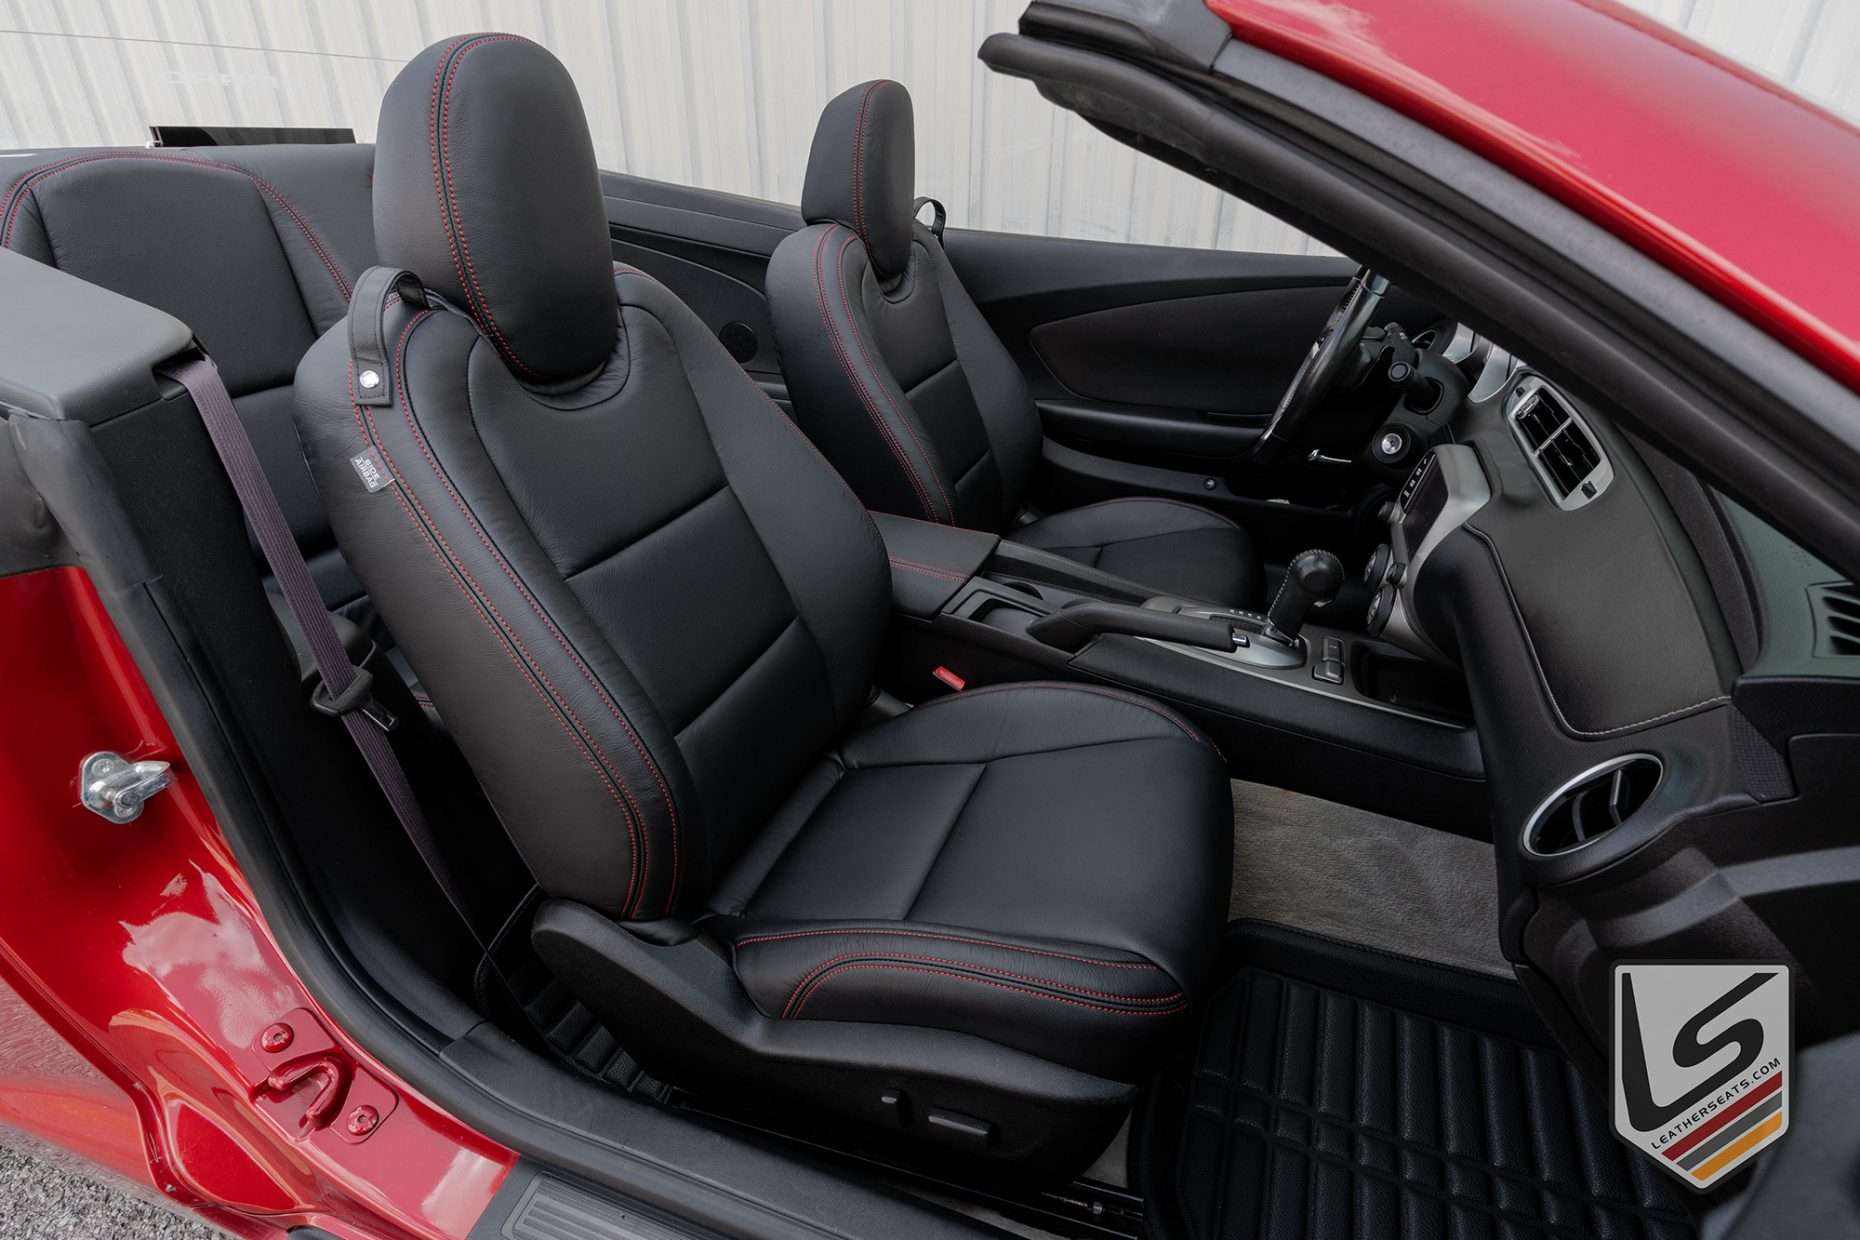 2015 Chevrolet Camarowith custom black leather seats and Cardinal stitching